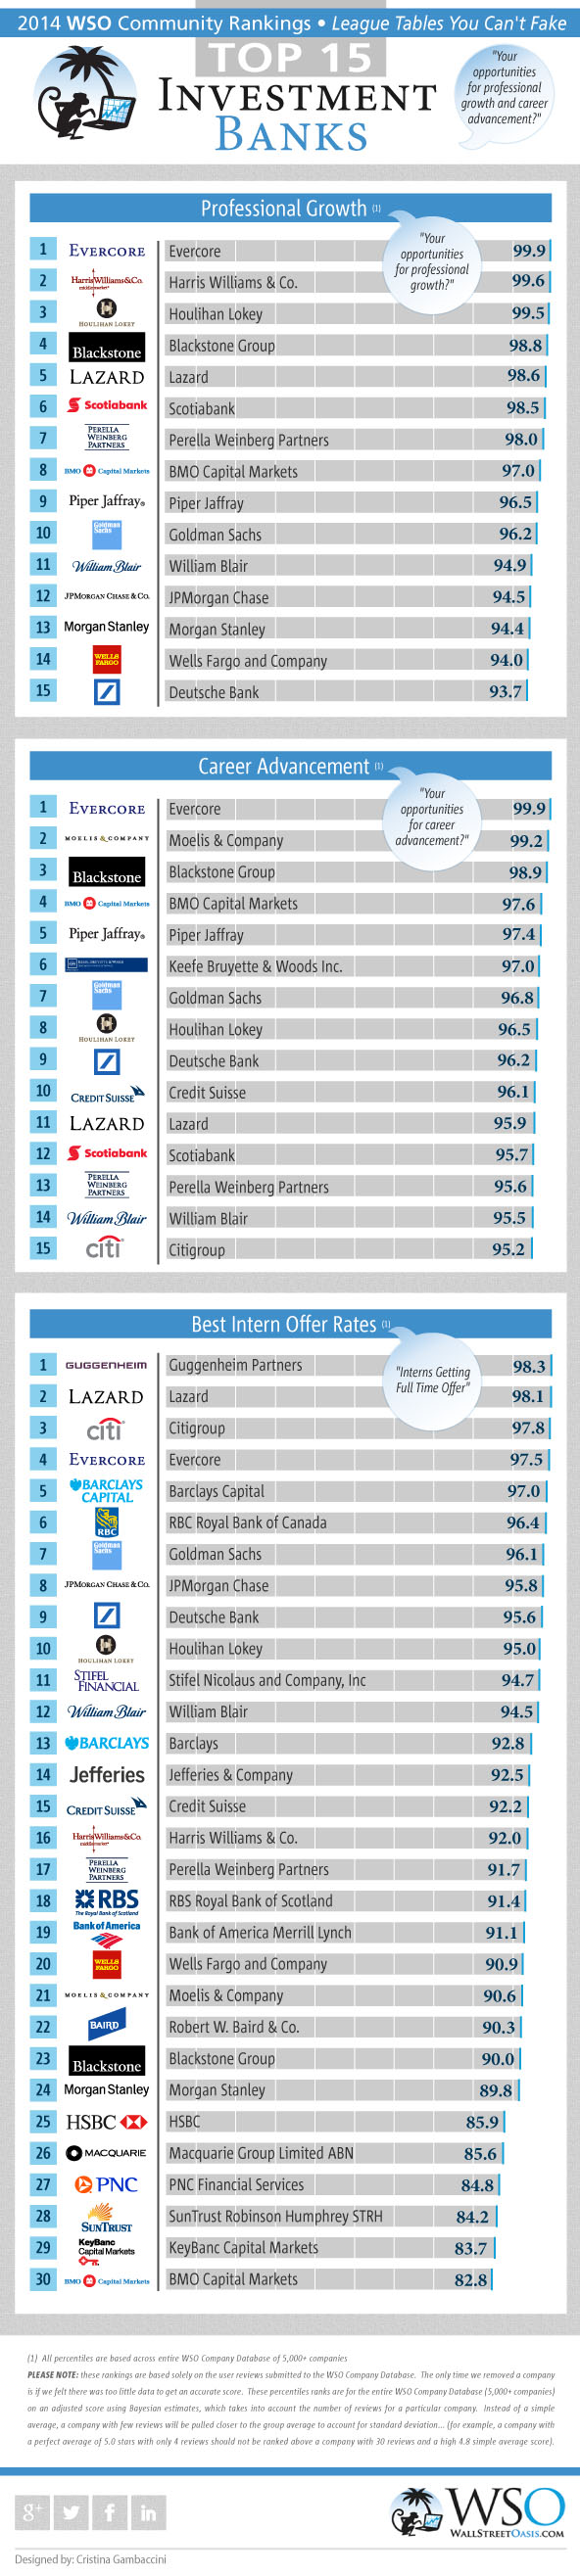 2014 Wso Rankings For Investment Banks Career Part 2 Of 10 Wall Street Oasis